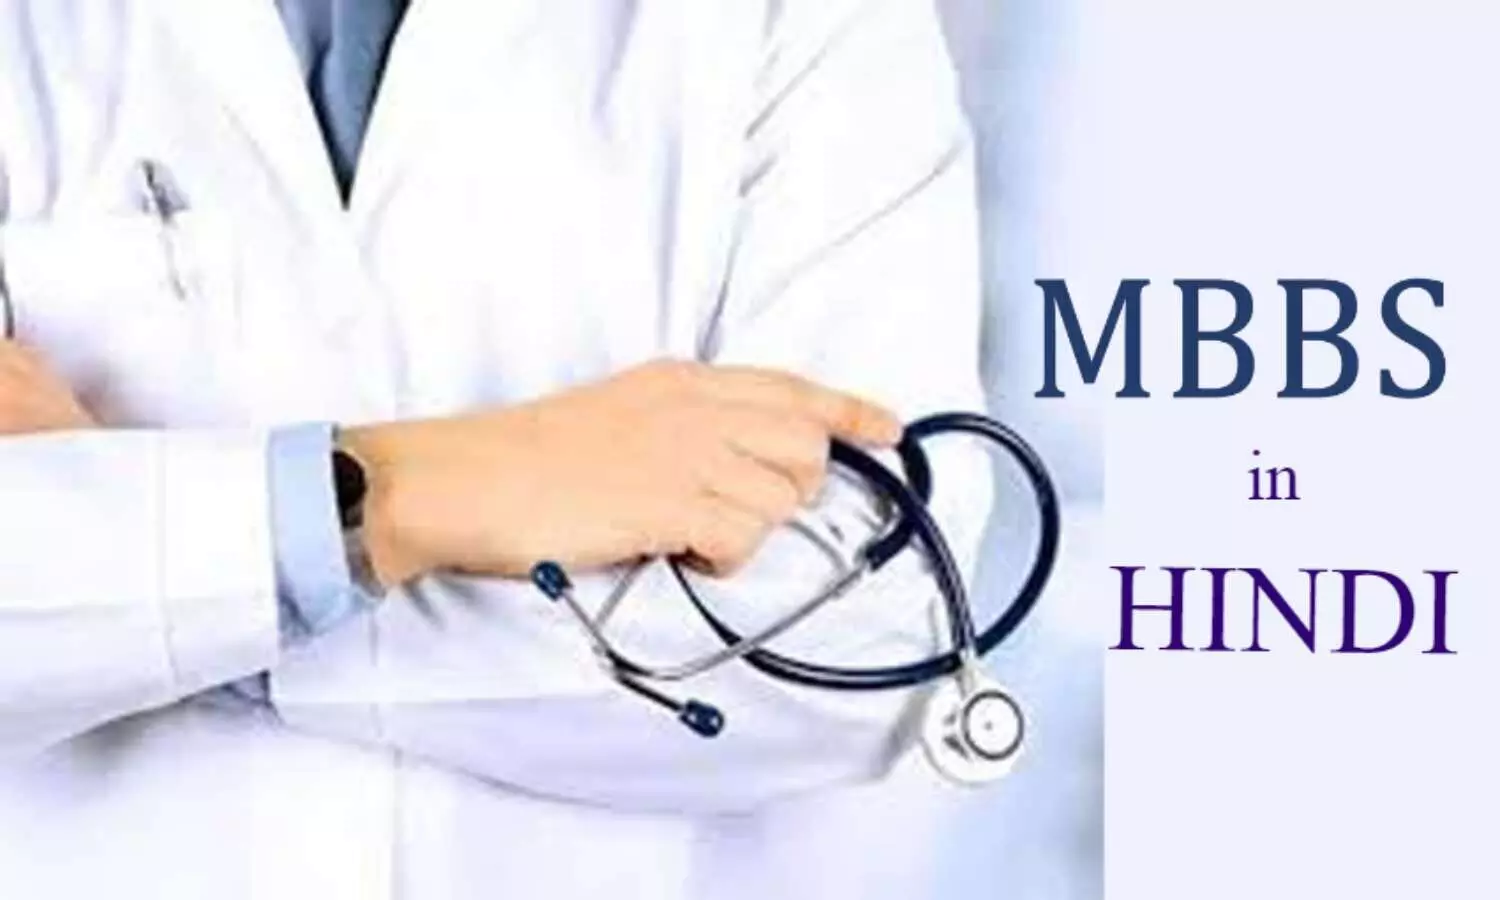 mbbs course madhya pradesh is the first state who starts mbbs studies in hindi